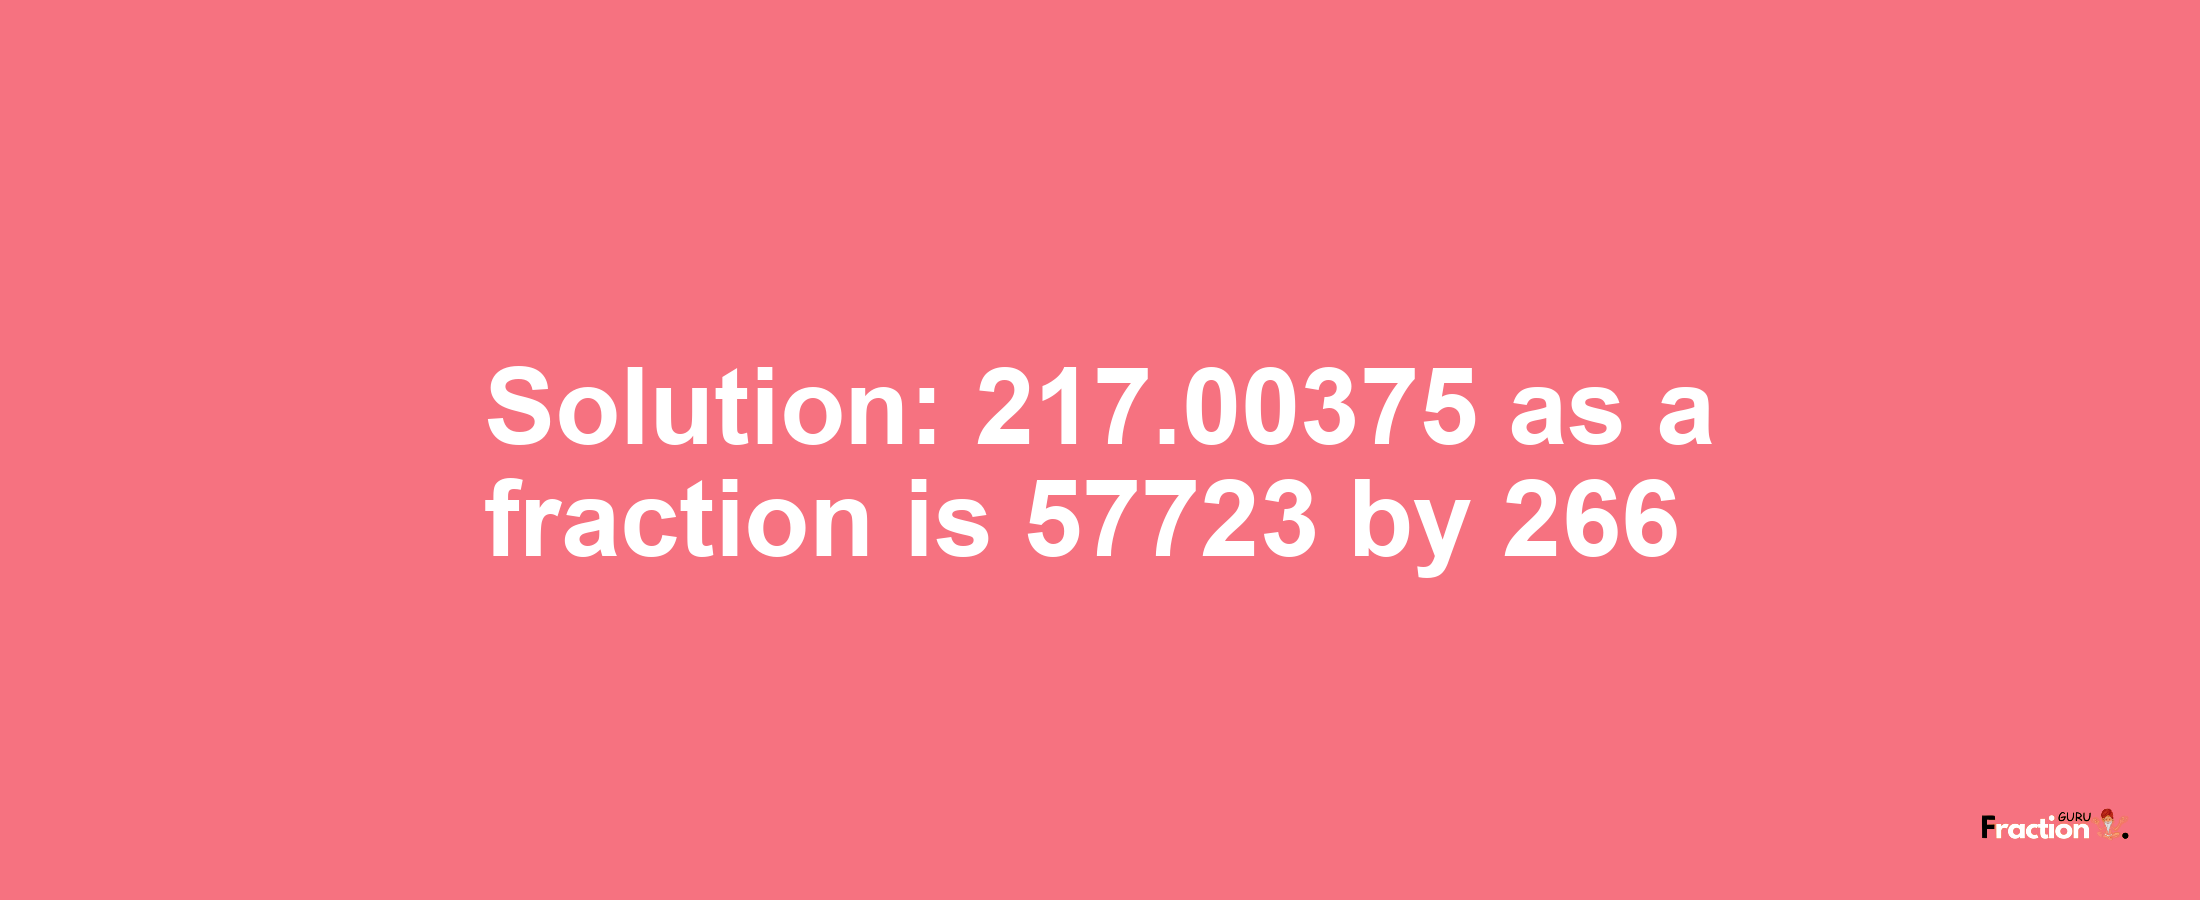 Solution:217.00375 as a fraction is 57723/266